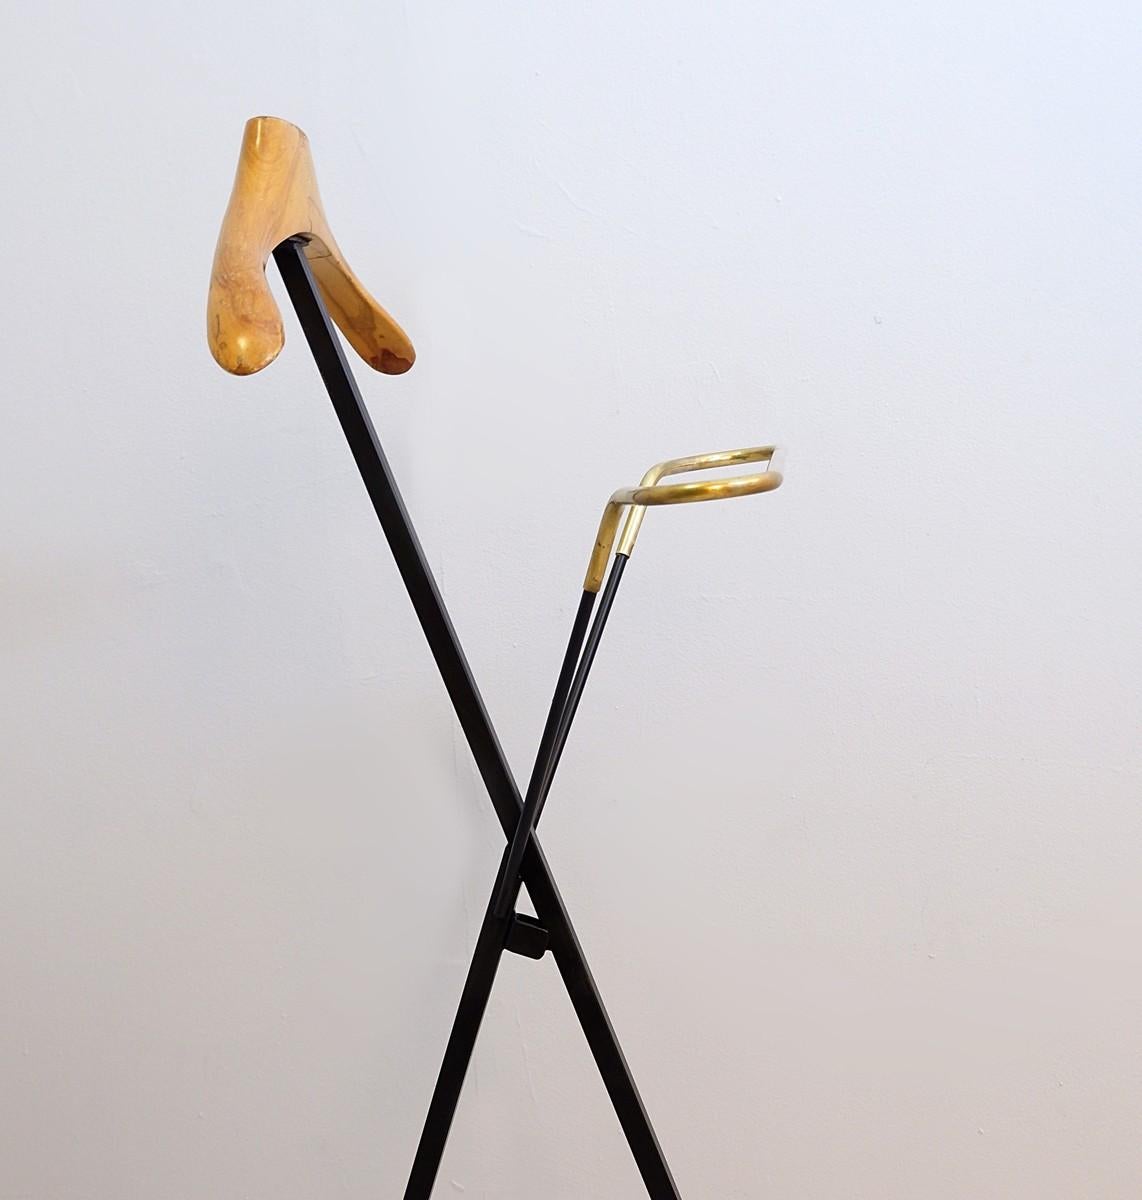 Italian black metal, wood and brass folding valet stand, 1950s.